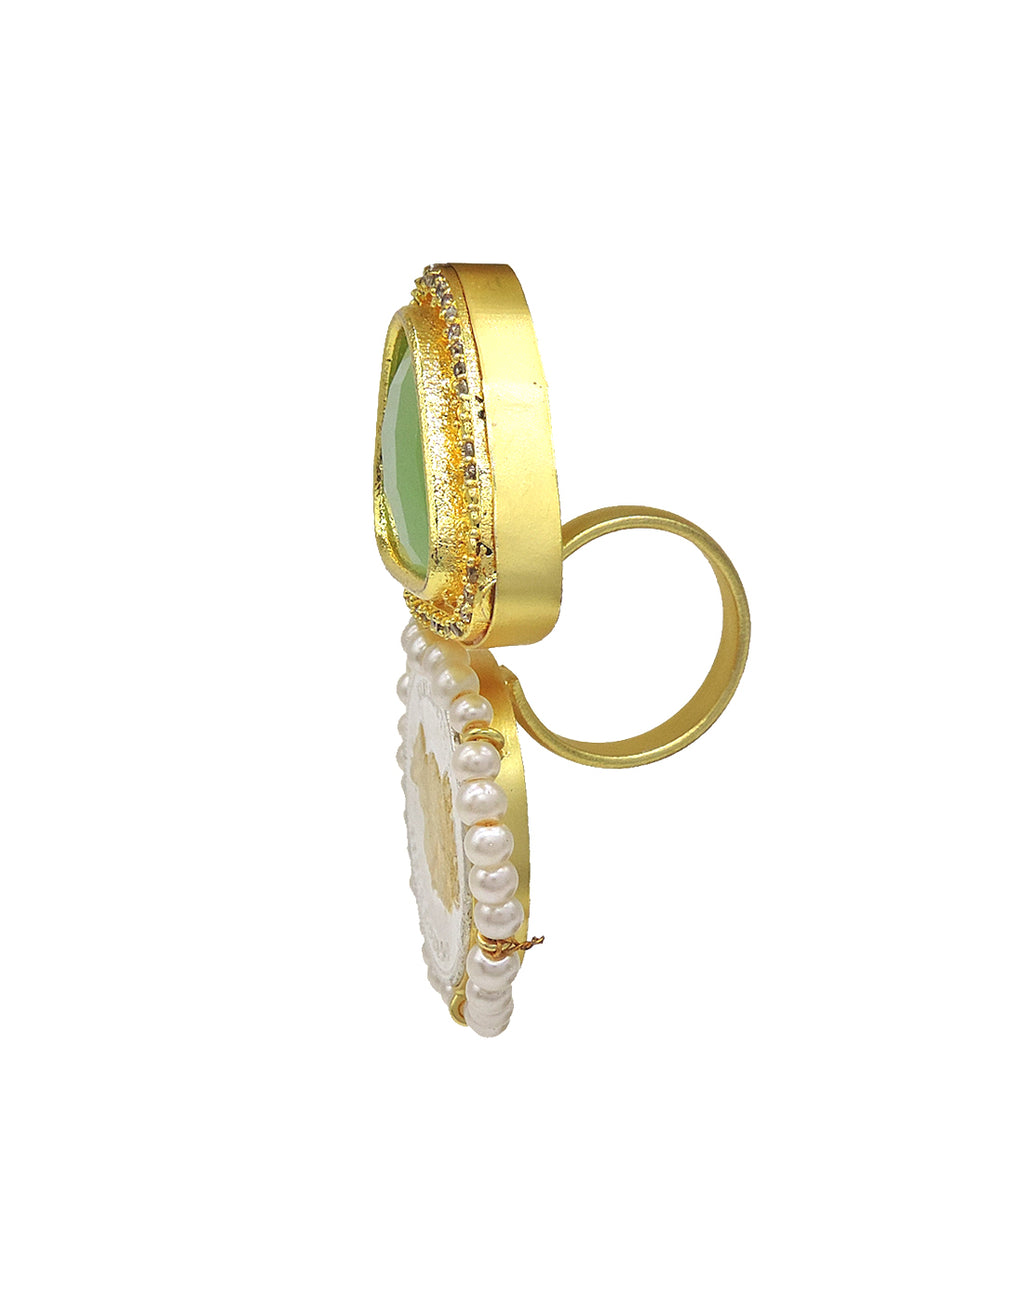 Coin Pear Ring - Statement Rings - Gold-Plated & Hypoallergenic Jewellery - Made in India - Dubai Jewellery - Dori